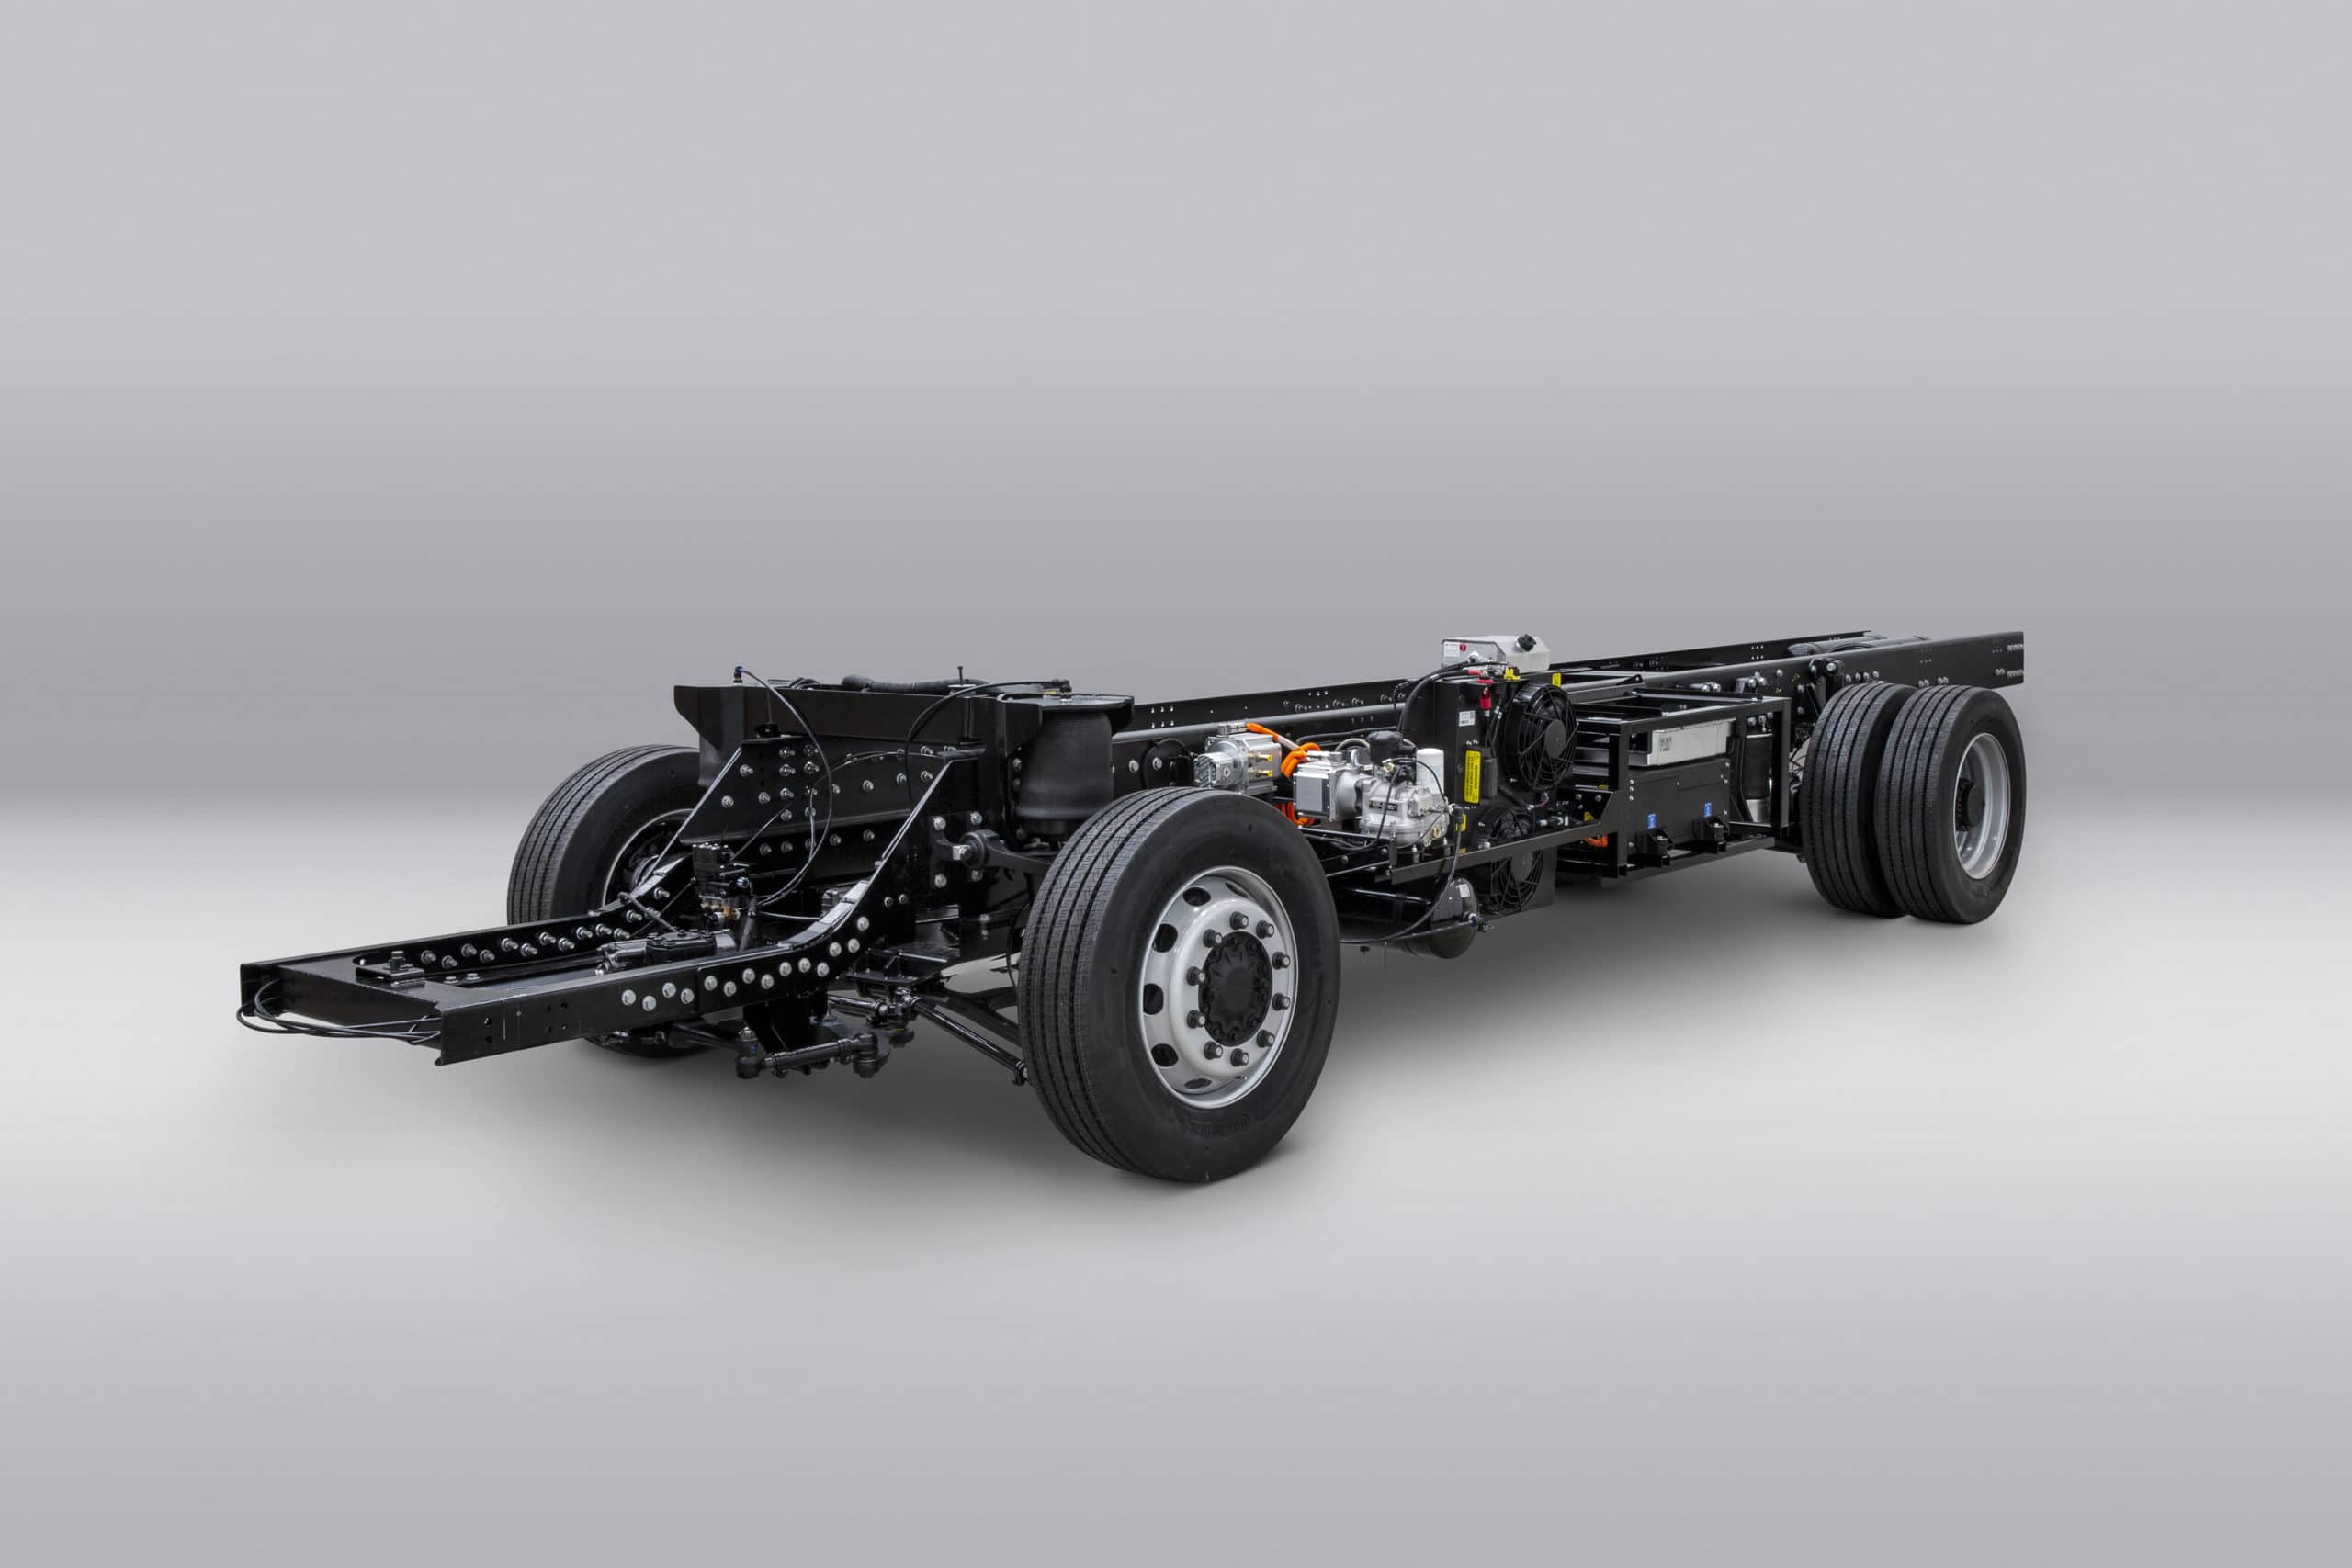 Volta Trucks reveals the first running Volta Zero prototype chassis, uniquely designed and built at industry-leading pace